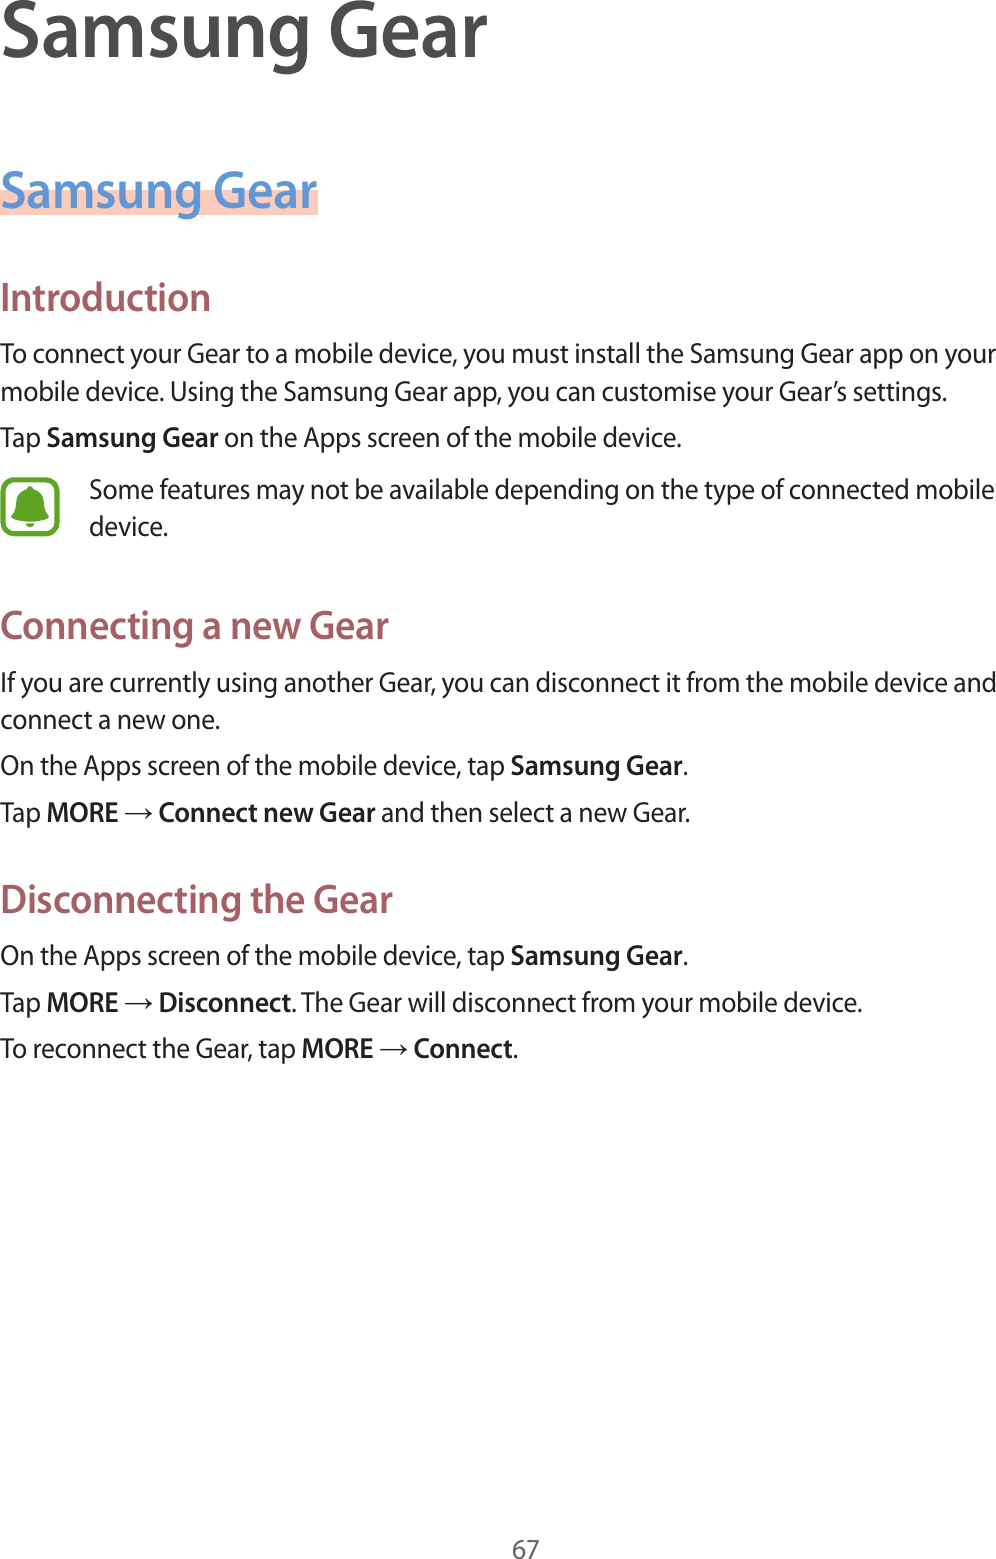 67Samsung GearSamsung GearIntroductionTo connect your Gear to a mobile device, you must install the Samsung Gear app on your mobile device. Using the Samsung Gear app, you can customise your Gear’s settings.Tap Samsung Gear on the Apps screen of the mobile device.Some features may not be available depending on the type of connected mobile device.Connecting a new GearIf you are currently using another Gear, you can disconnect it from the mobile device and connect a new one.On the Apps screen of the mobile device, tap Samsung Gear.Tap MORE → Connect new Gear and then select a new Gear.Disconnecting the GearOn the Apps screen of the mobile device, tap Samsung Gear.Tap MORE → Disconnect. The Gear will disconnect from your mobile device.To reconnect the Gear, tap MORE → Connect.